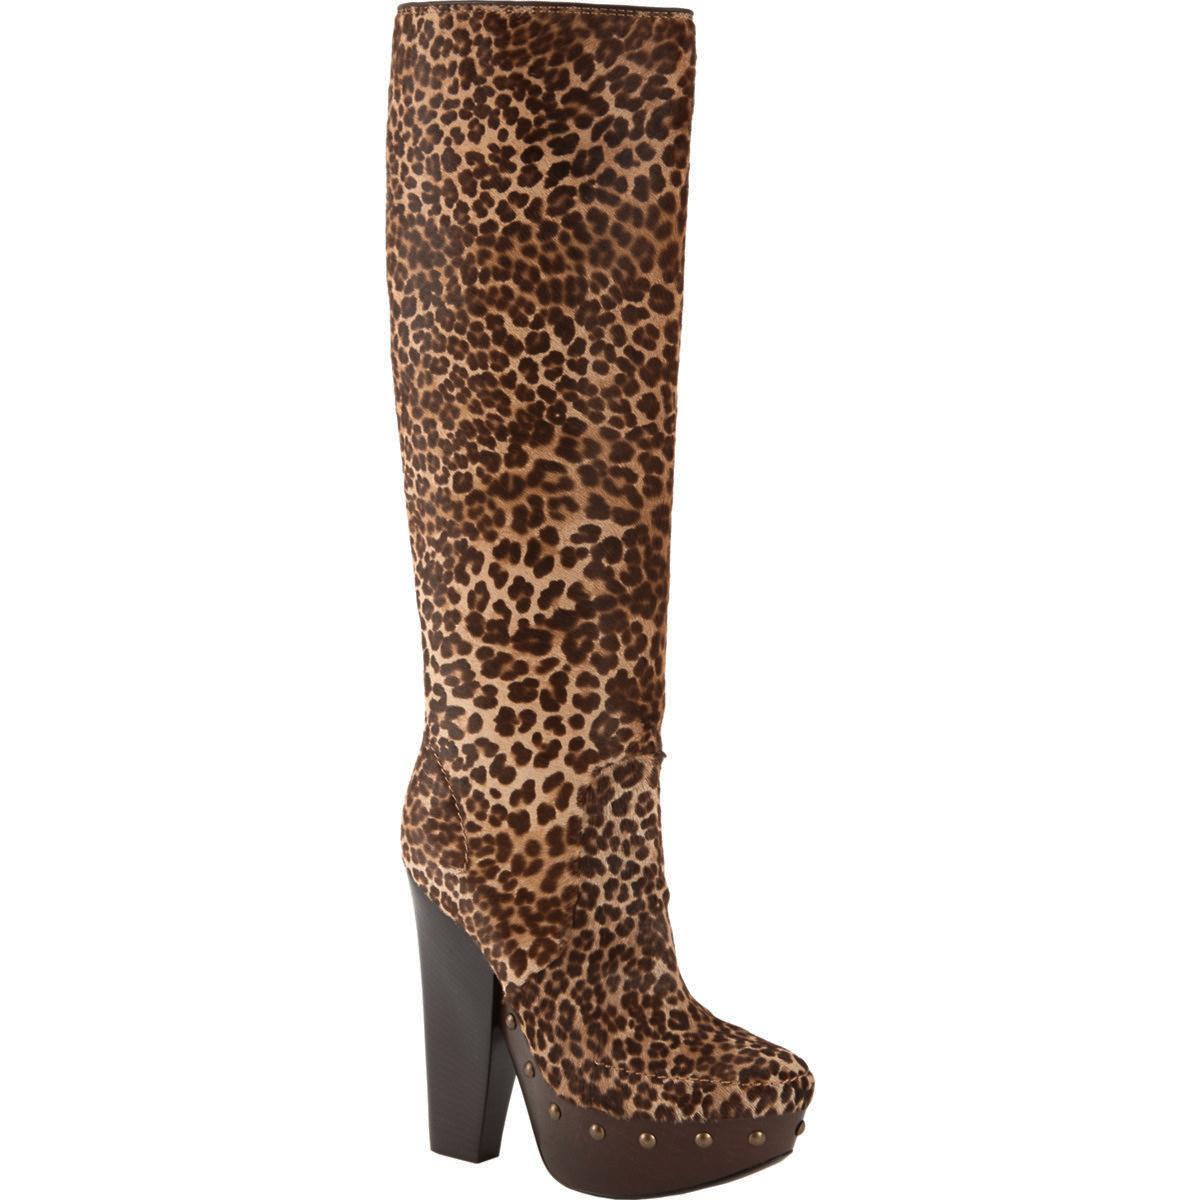 New LANVIN Leopard-Print Platform Studded Knee Boots
Italian sizes available: 37.5 ( US 7.5 ) 38.5 ( US 8.5 )
Color – Brown / Multi Color
Leopard-Print Dyed Hair-Calf (NEW ZEALAND)
Antique Coppertone Studs Along Platform
Tonal Top-Stitching, Round